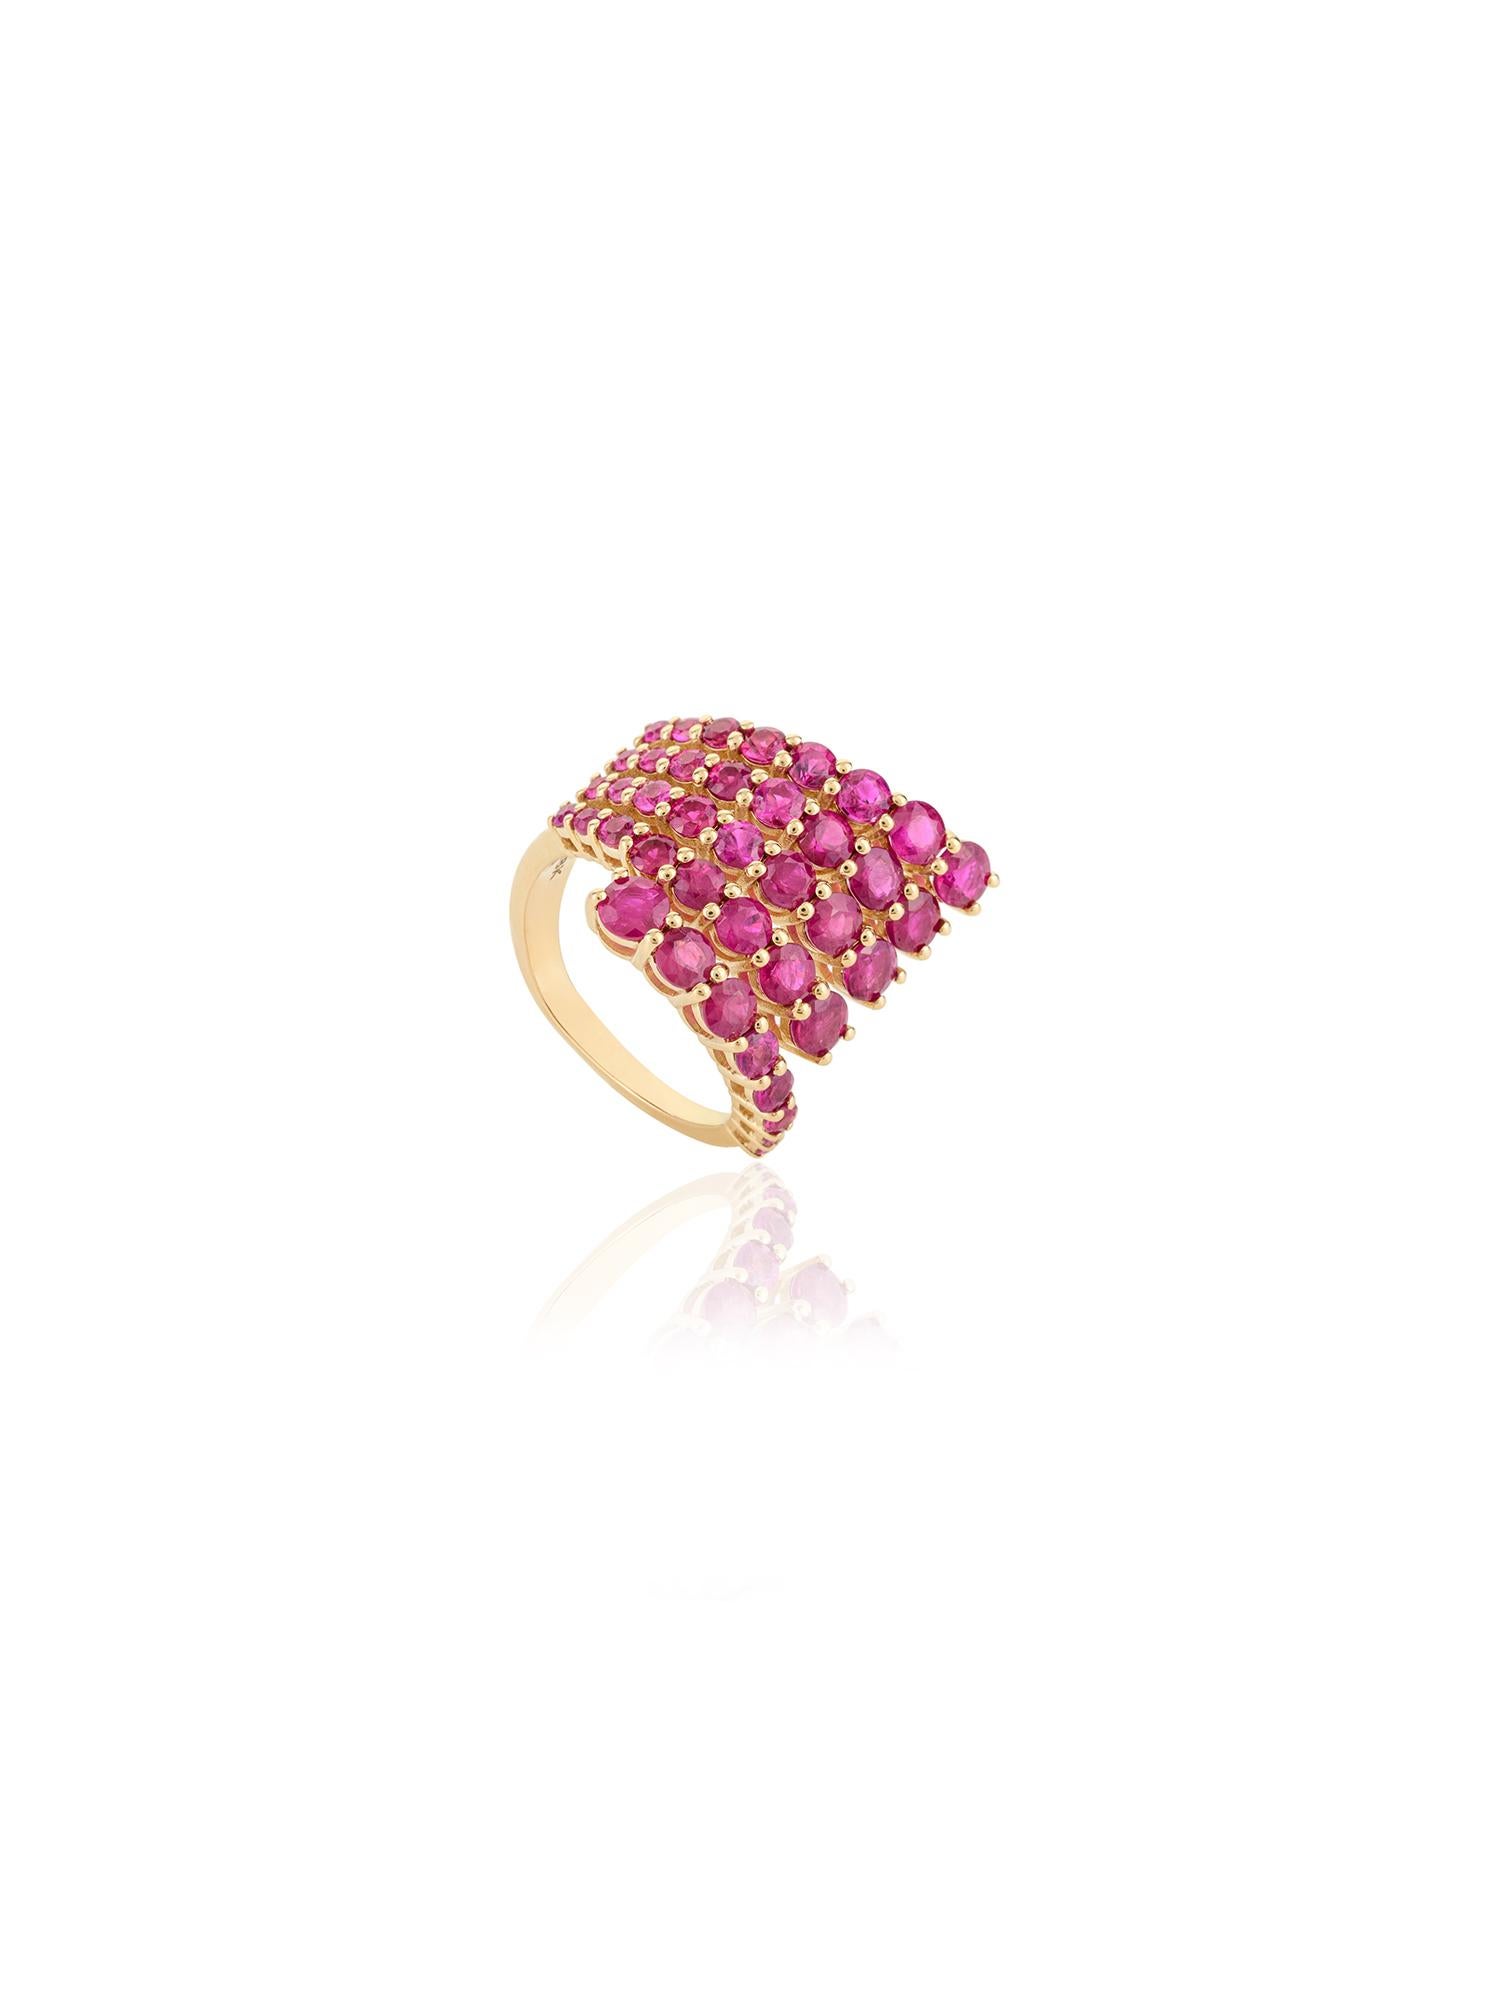 For Sale:  18k Yellow Gold Designer Multi Wrap 5.1 CTW Ruby Cocktail Ring Gift for Women 3